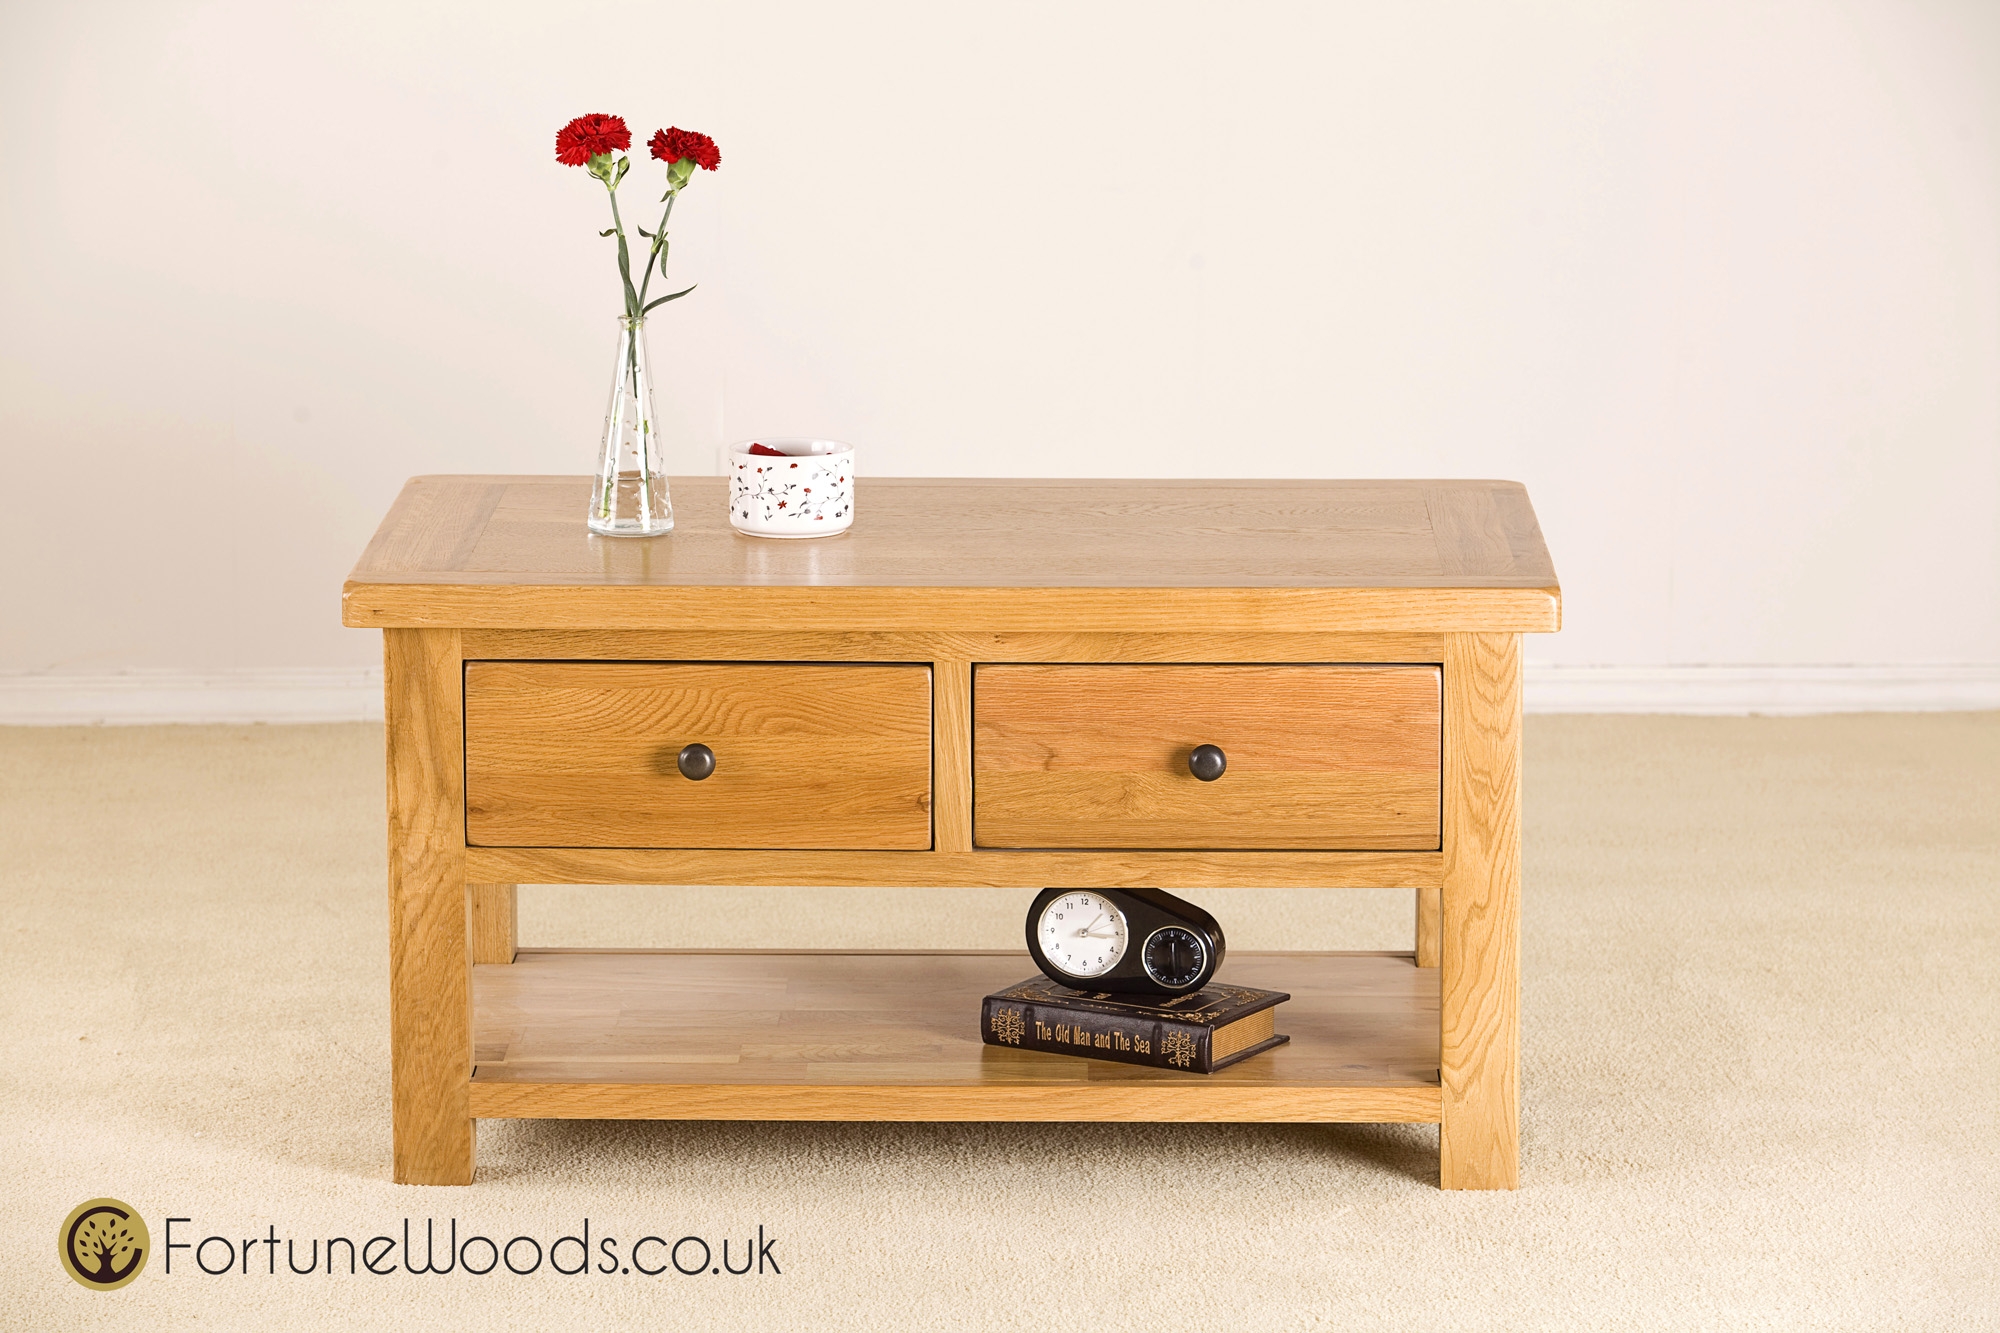 Fortune Woods Cotswold 2 Drawer Coffee Table